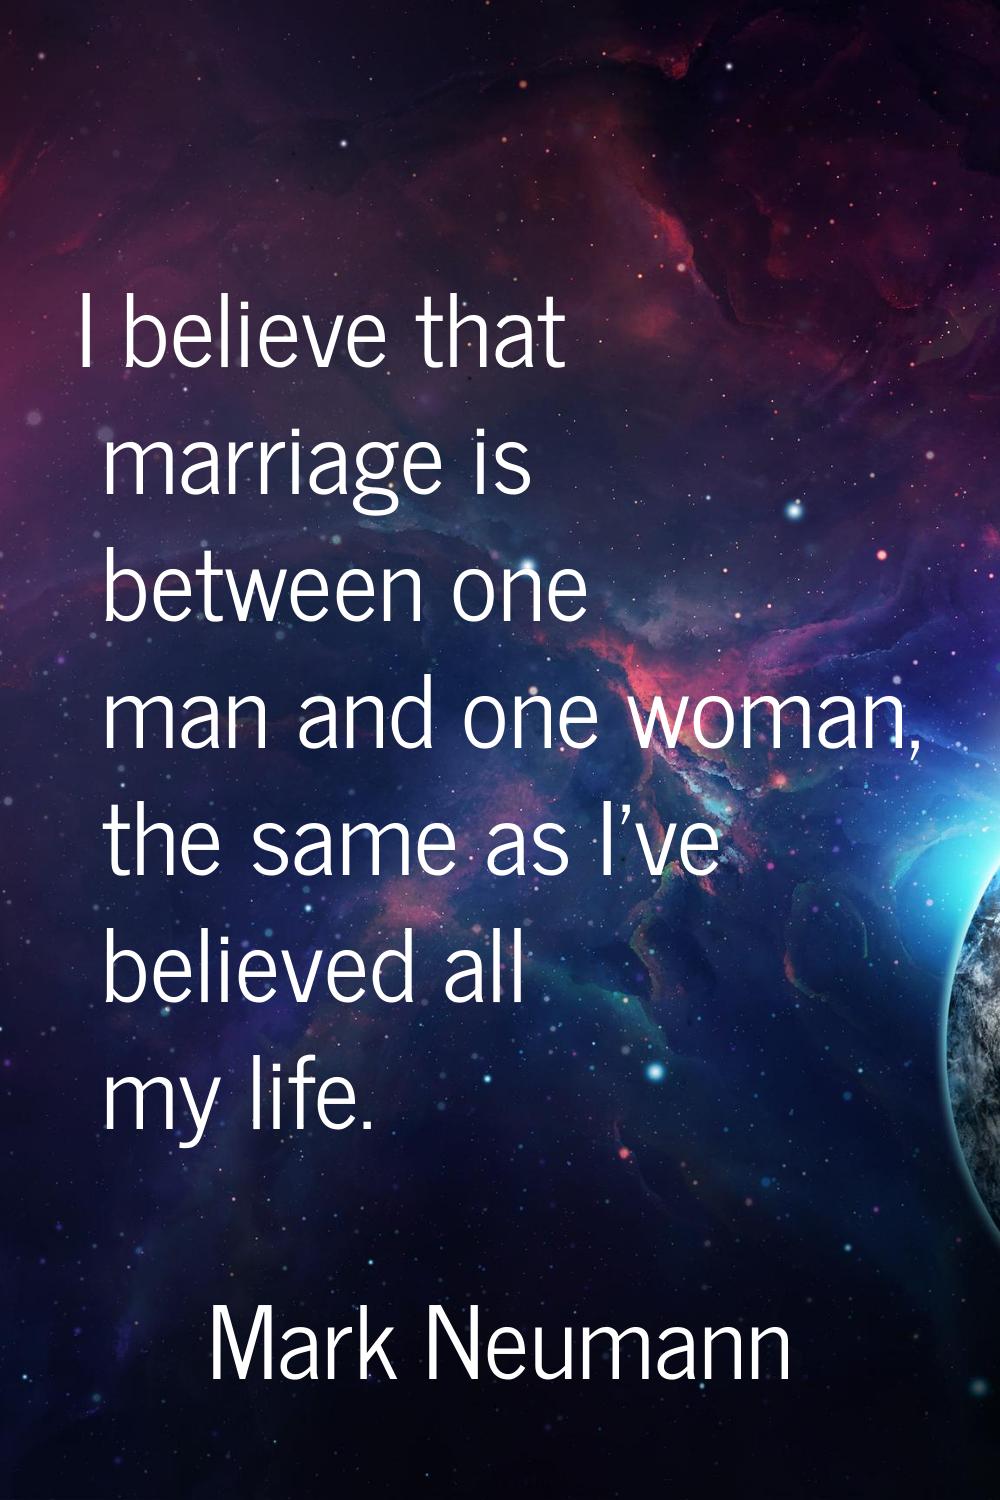 I believe that marriage is between one man and one woman, the same as I've believed all my life.